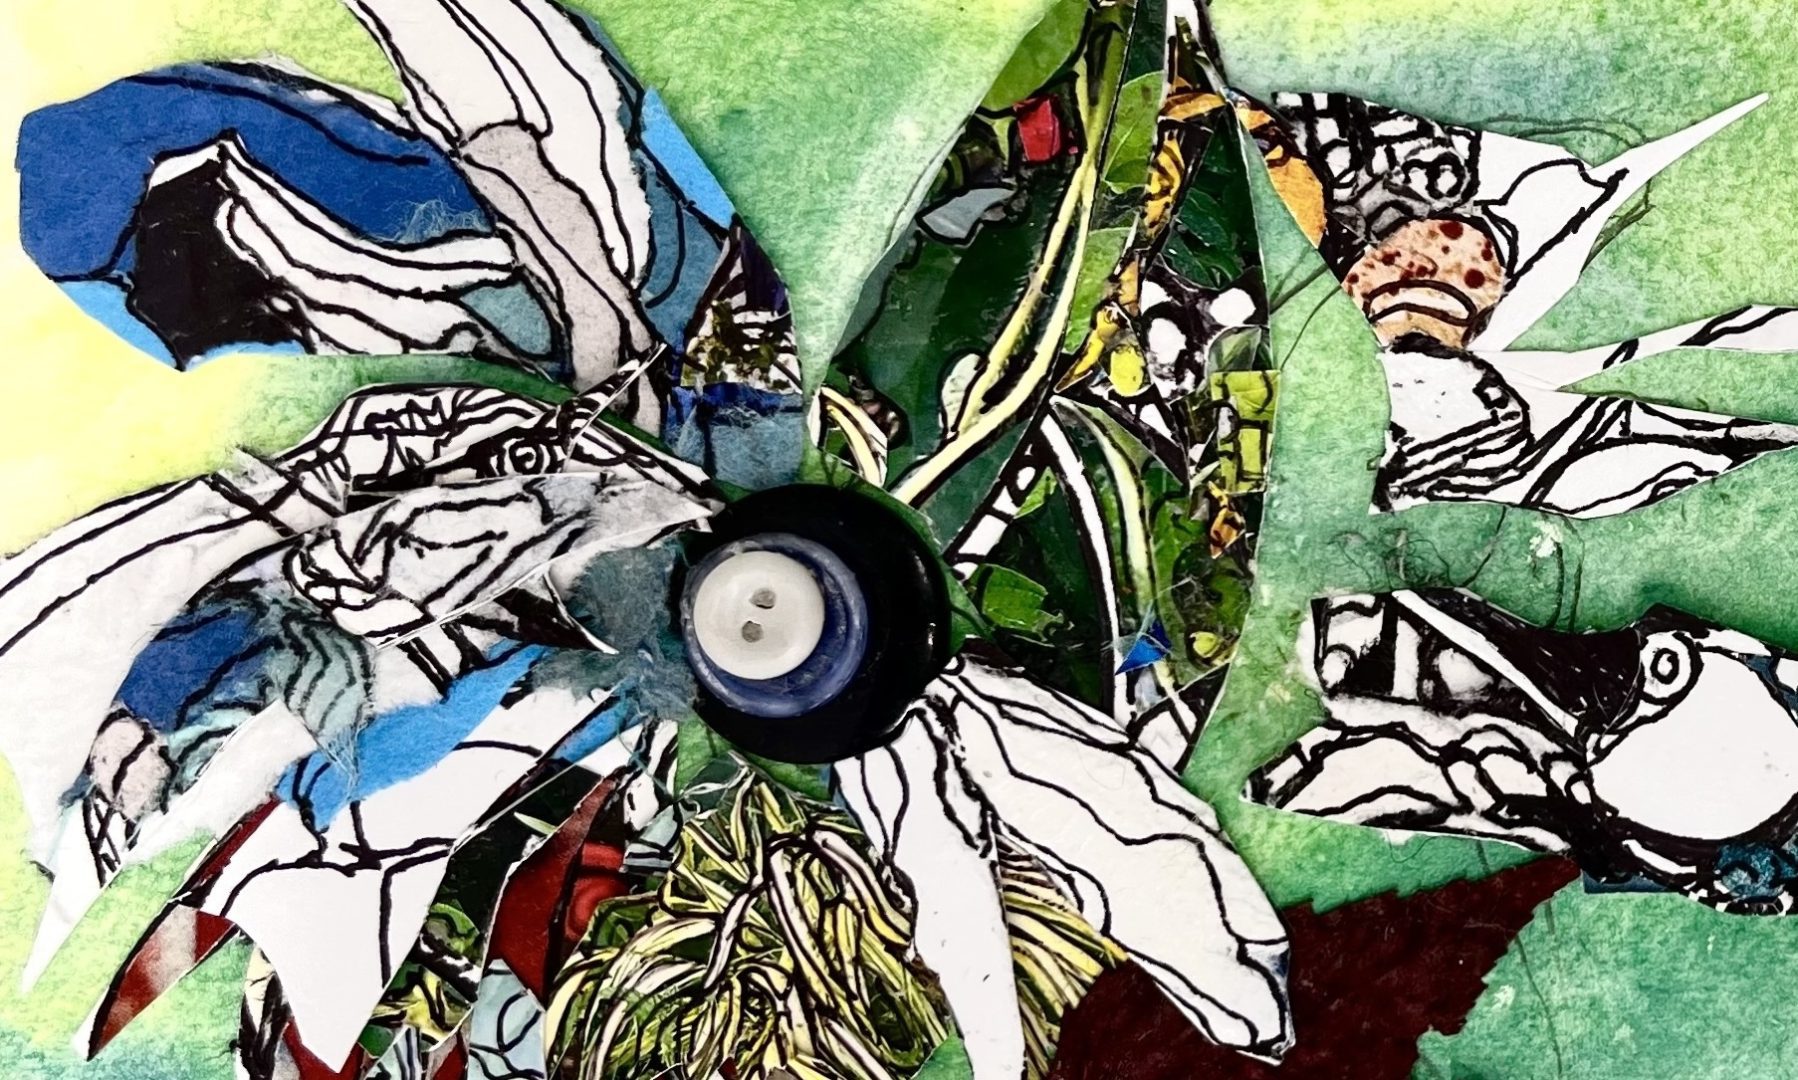 A close up view of an abstract flower constructed with strips of paper and found objects, including buttons and yarn, sprouting from the center of the flower against a backdrop of soothing yellow, blue, and green watercolor paints.